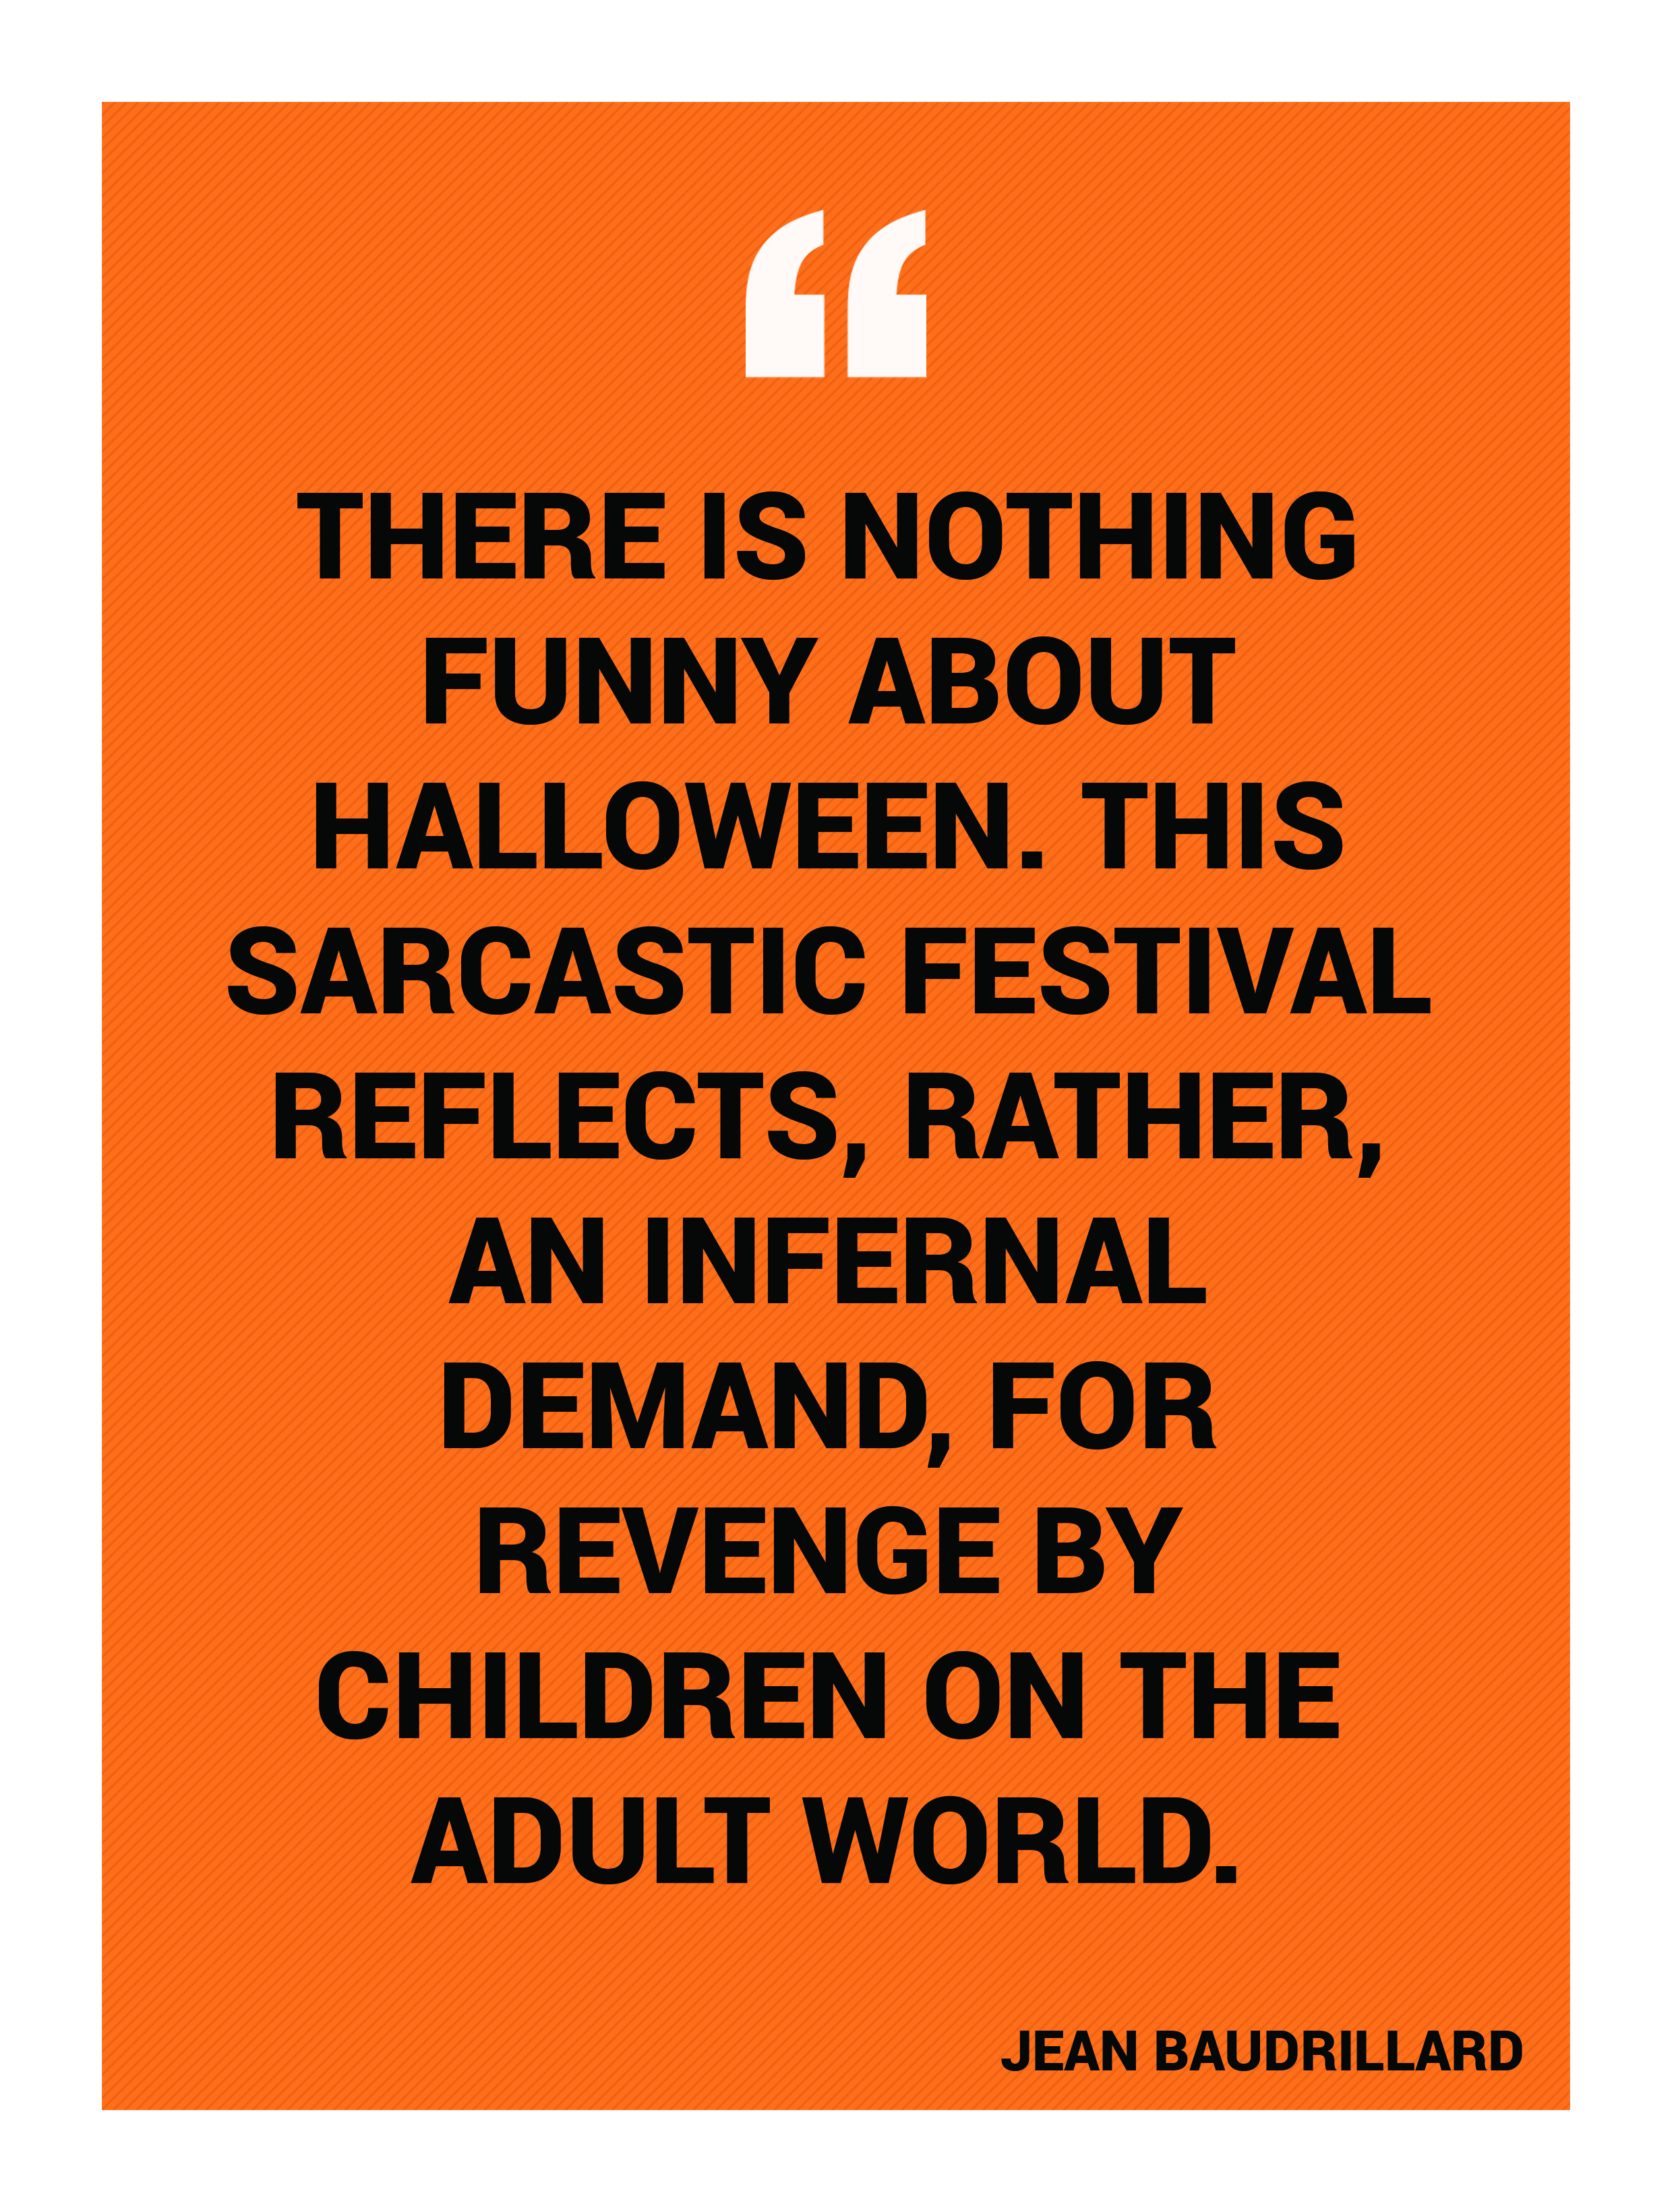 “There is nothing funny about Halloween. This sarcastic festival reflects, rather, an infernal demand, for revenge by children on the adult world.” -Jean Baudrillard